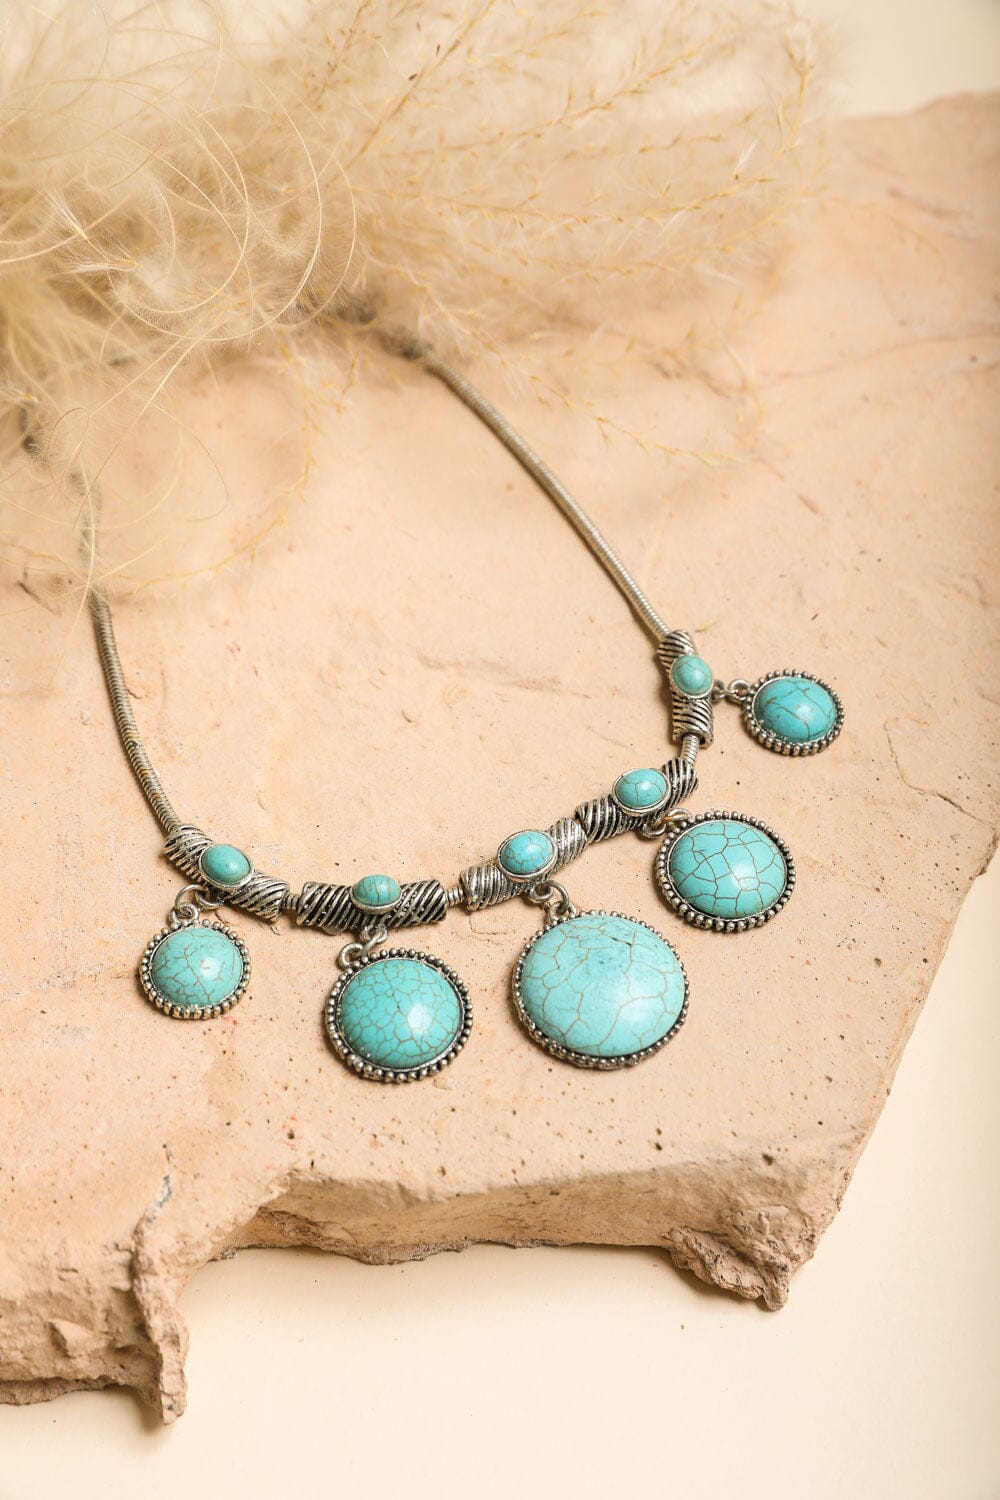 Turquoise Charm Link Necklace Jewelry Leto Collection 